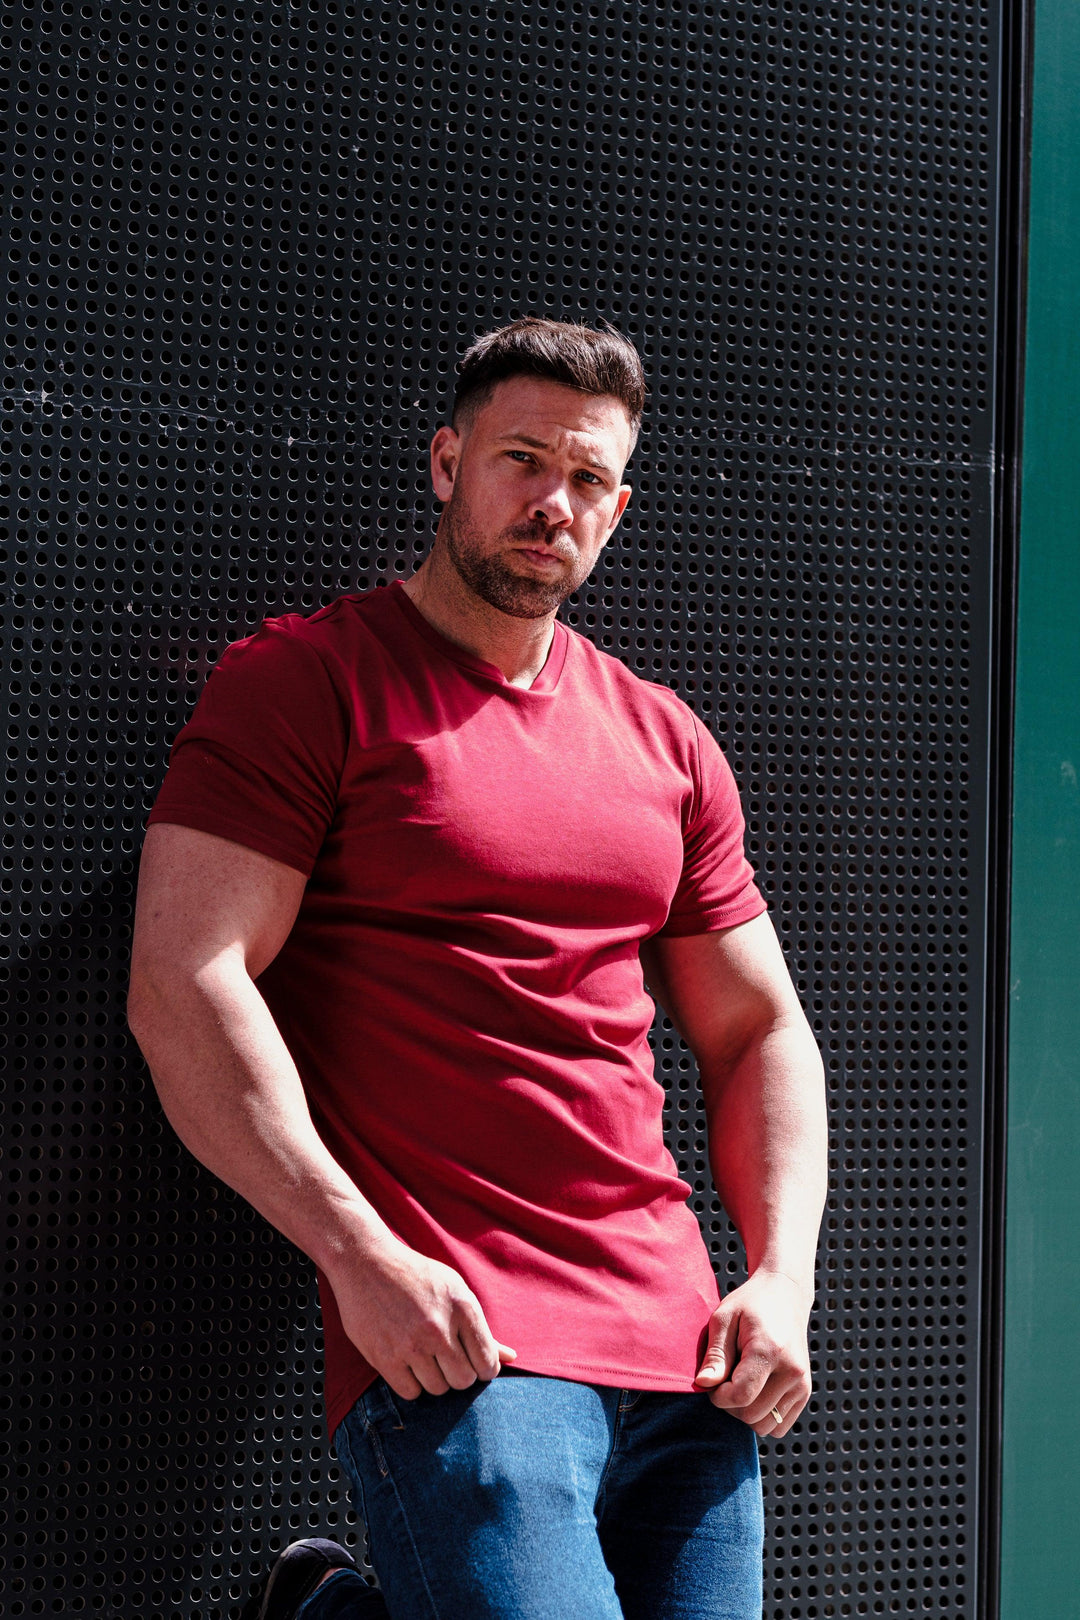 Burgundy Muscle Fit Tee. A Proportionally Fitted and Muscle Fit Tee in Burgundy. Ideal for bodybuilders.